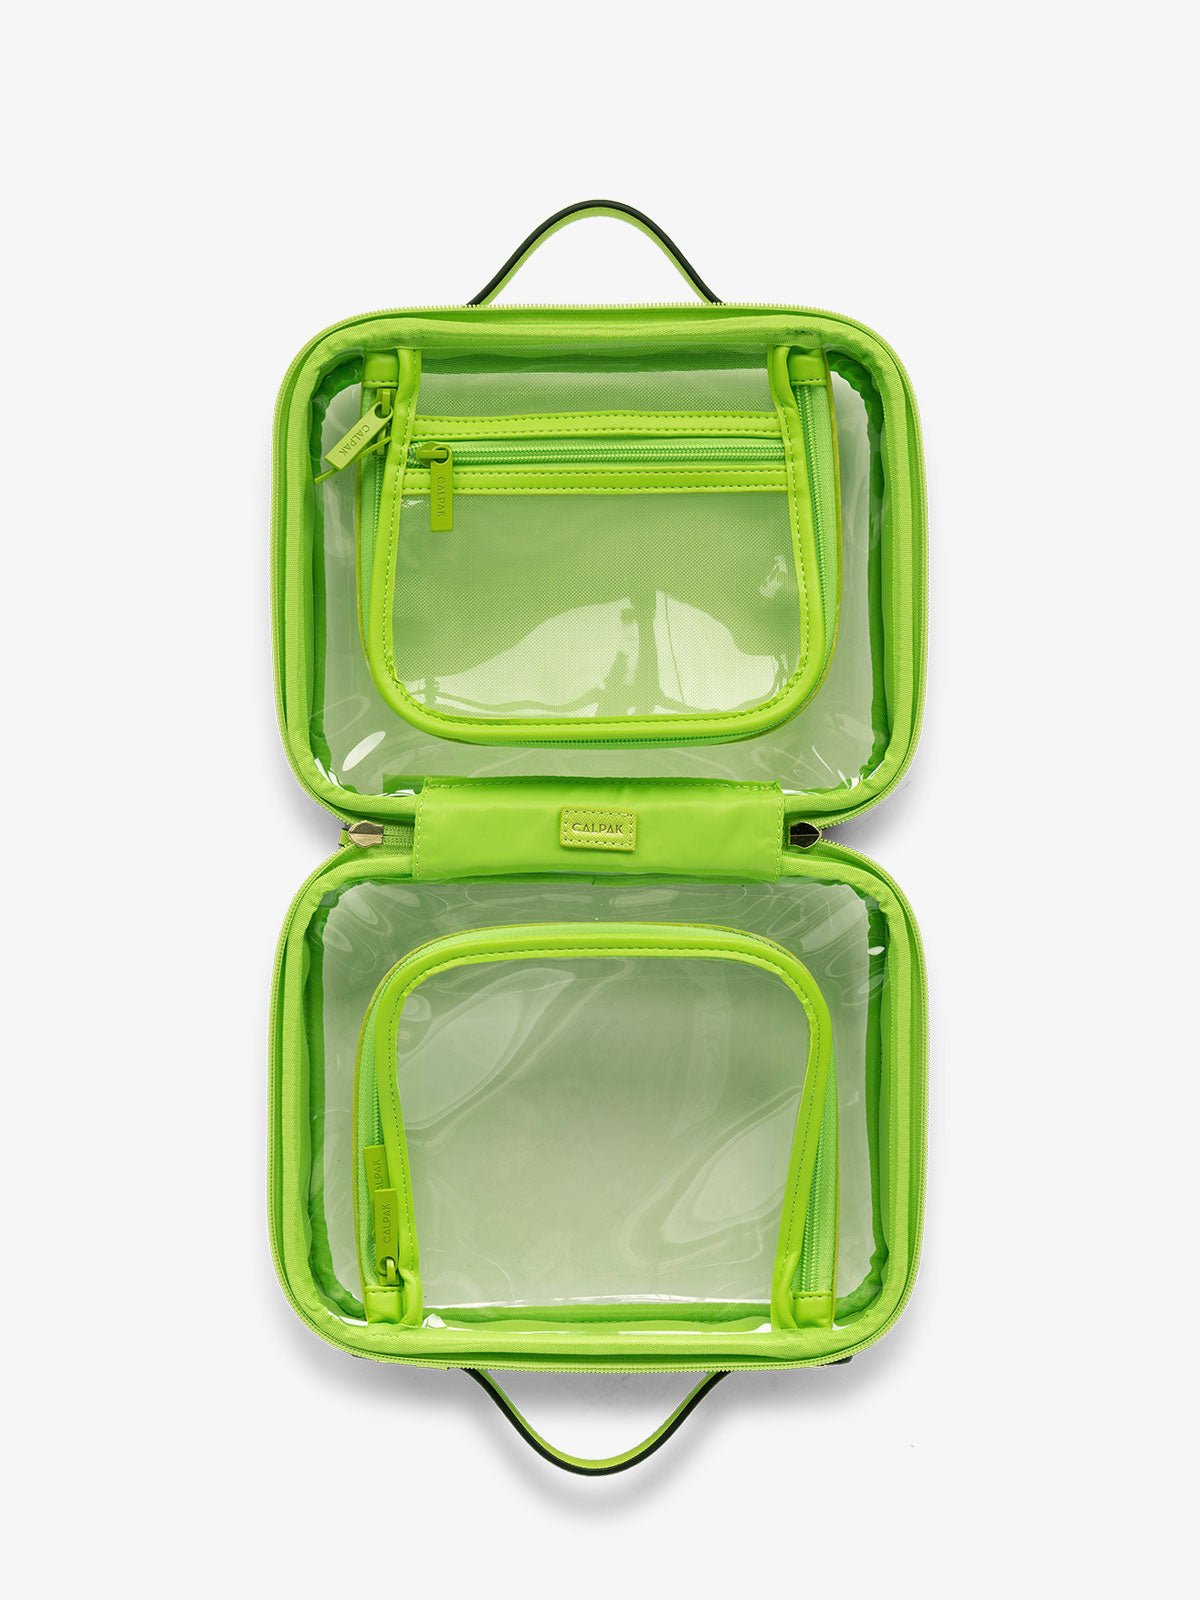 CALPAK clear travel makeup bag with zipper enclosed compartments in lime green